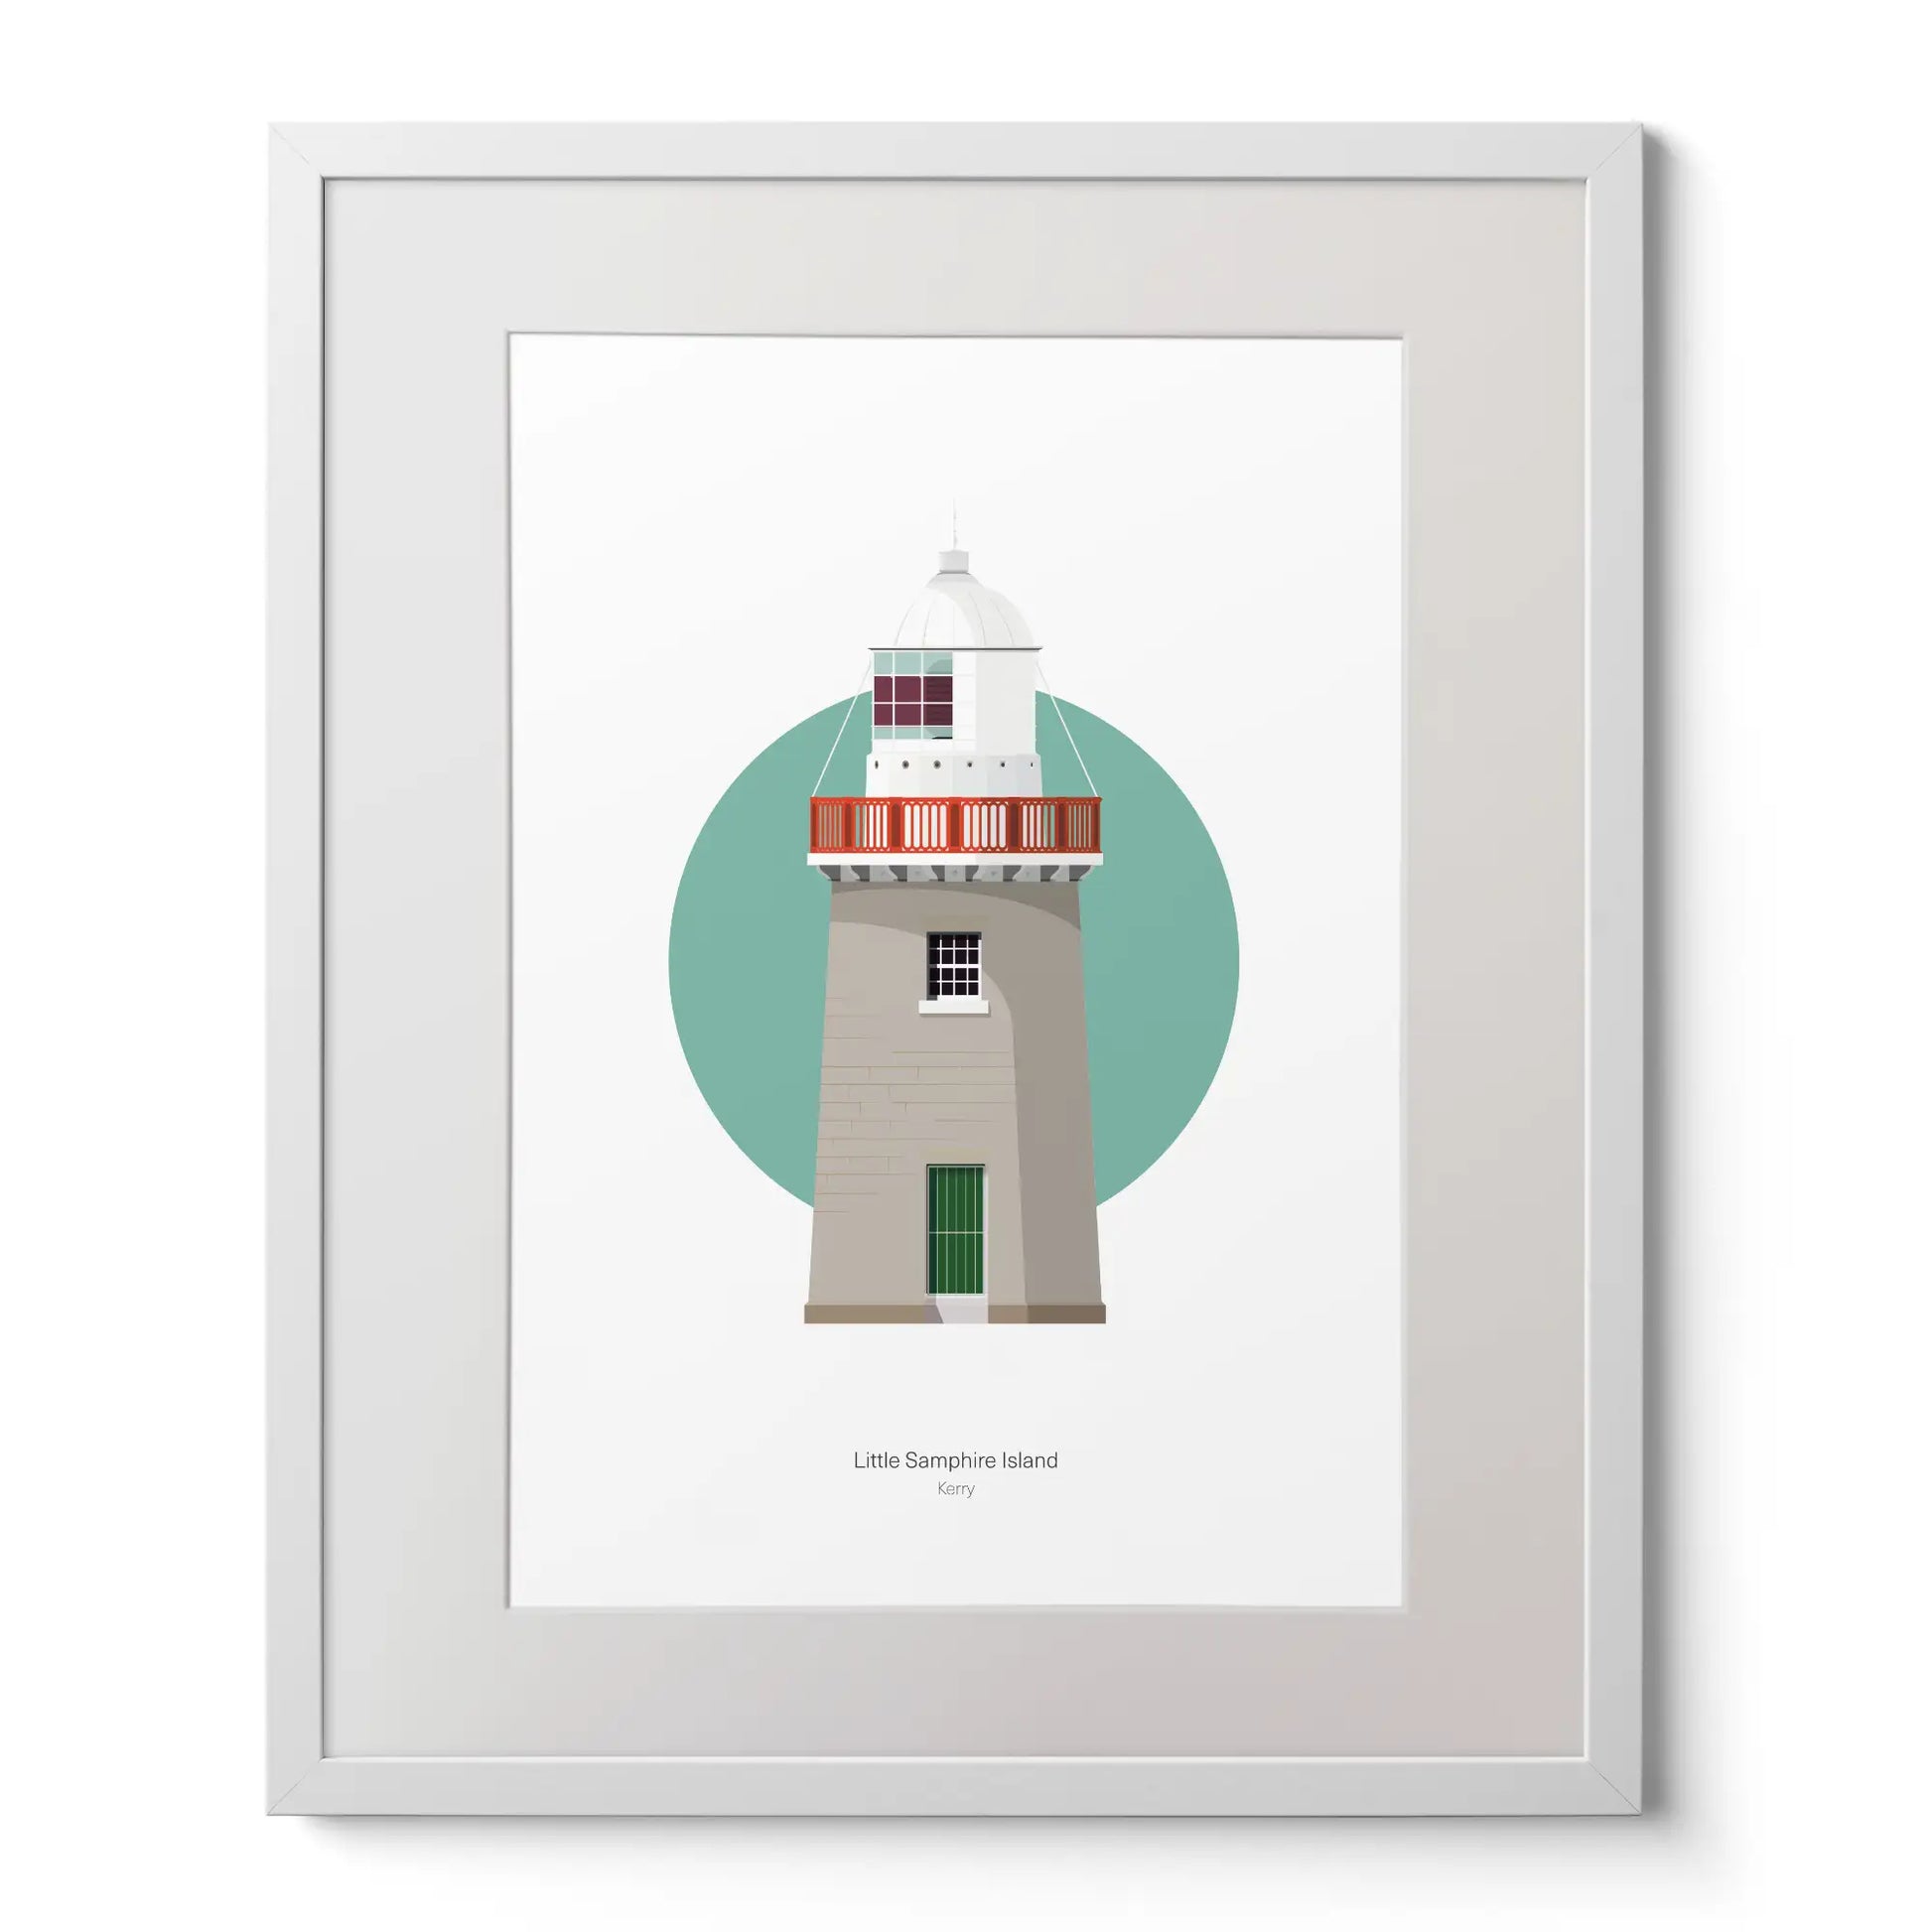 Contemporary art print of Little Samphire Island lighthouse on a white background inside light blue square,  in a white frame measuring 40x50cm.